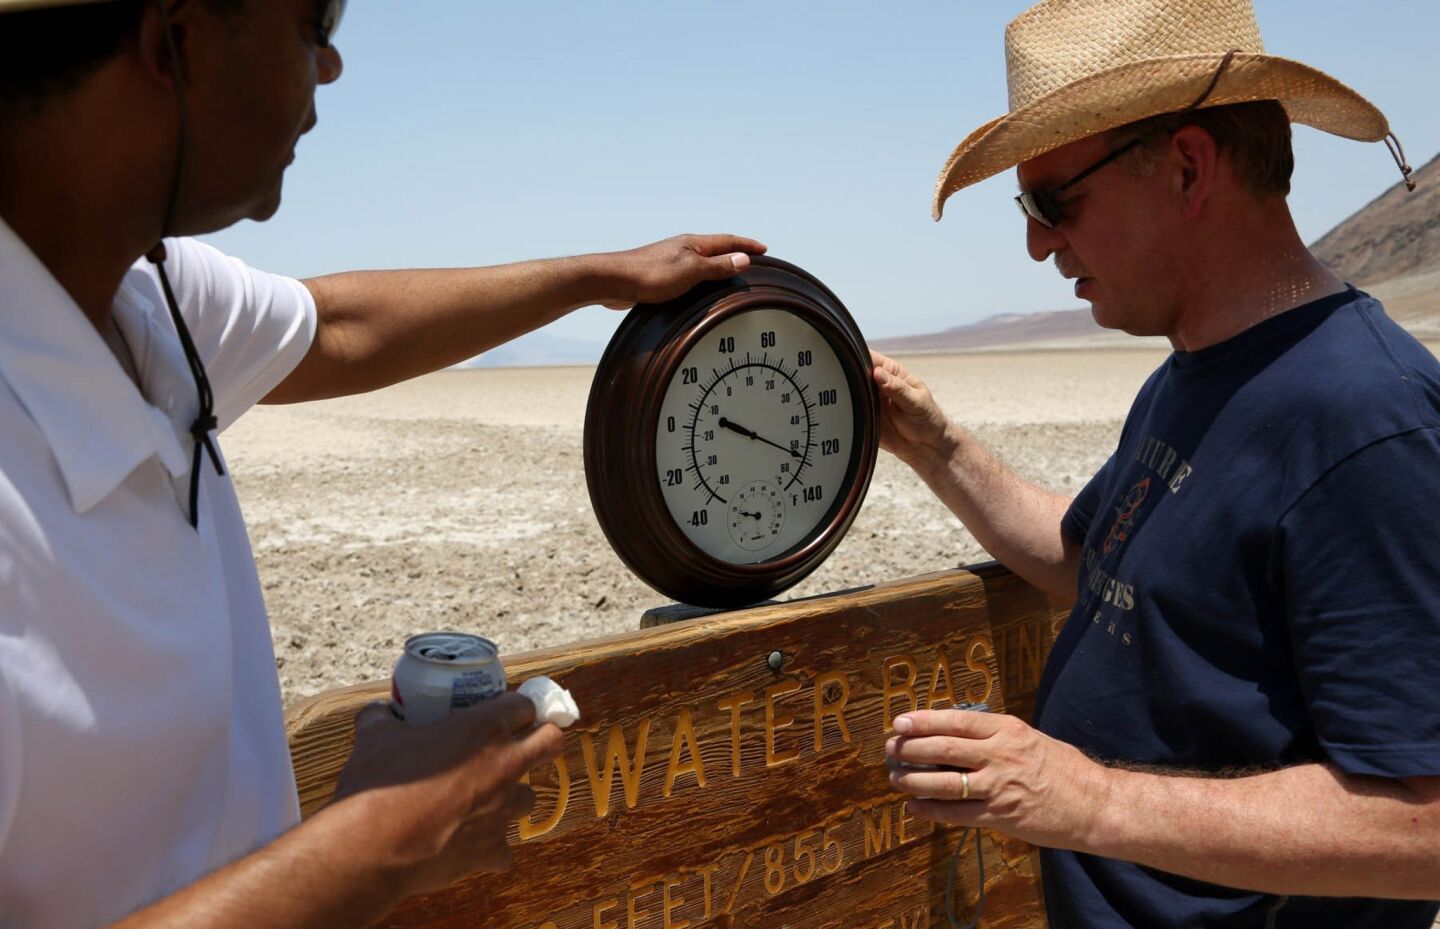 Randy Thomas, left, of Vacaville, Calif., helps Andreas Kinnen from Germany hold up a thermometer in Death Valley's Badwater Basin.